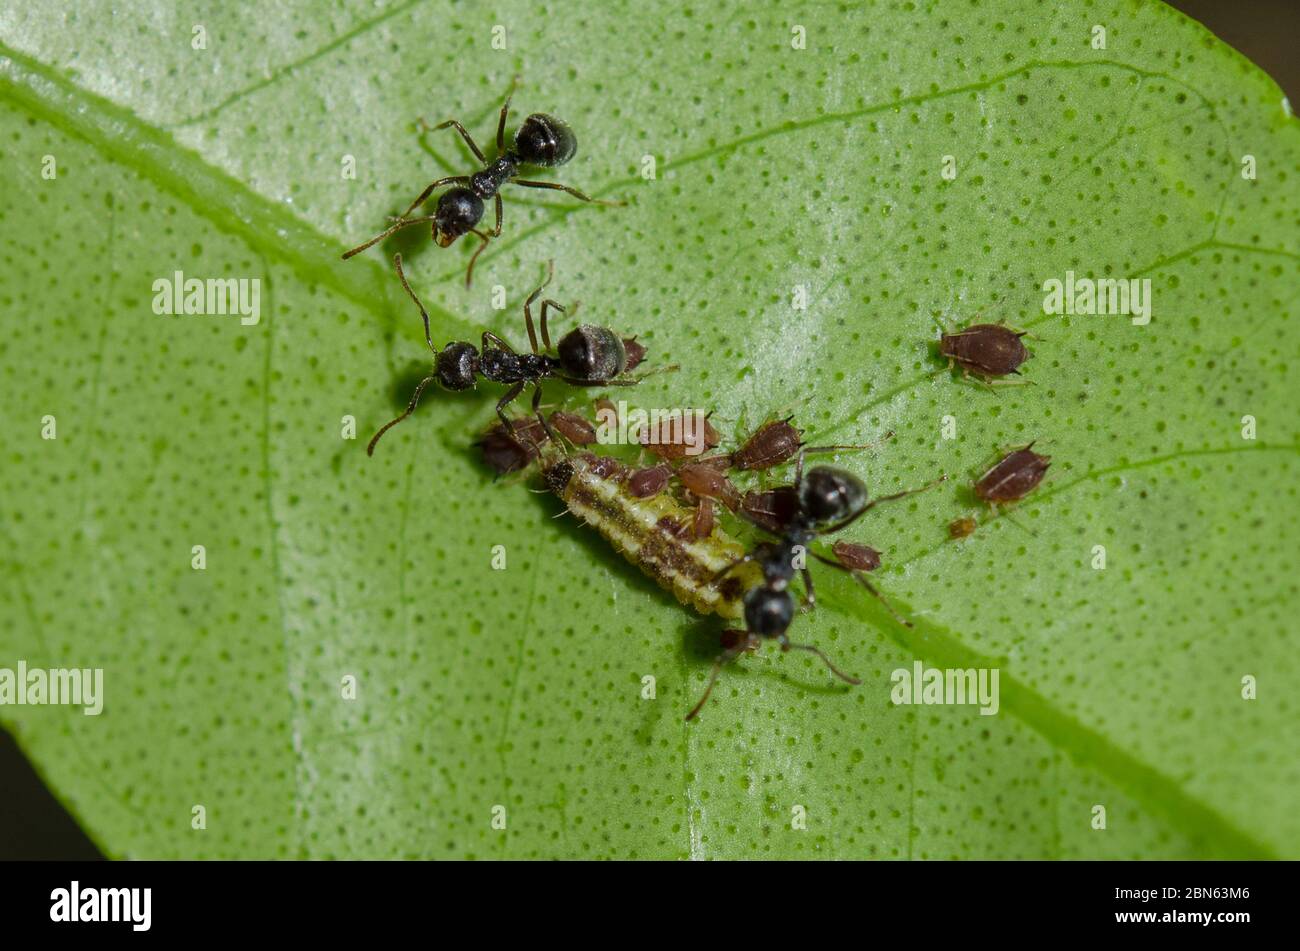 Caterpillar, Miletus sp, and Aphids, Aphididae Family, being tended by Black Weaver Ants. Polyrhachis sp, on leaf, Klungkung, Bali, Indonesia Stock Photo